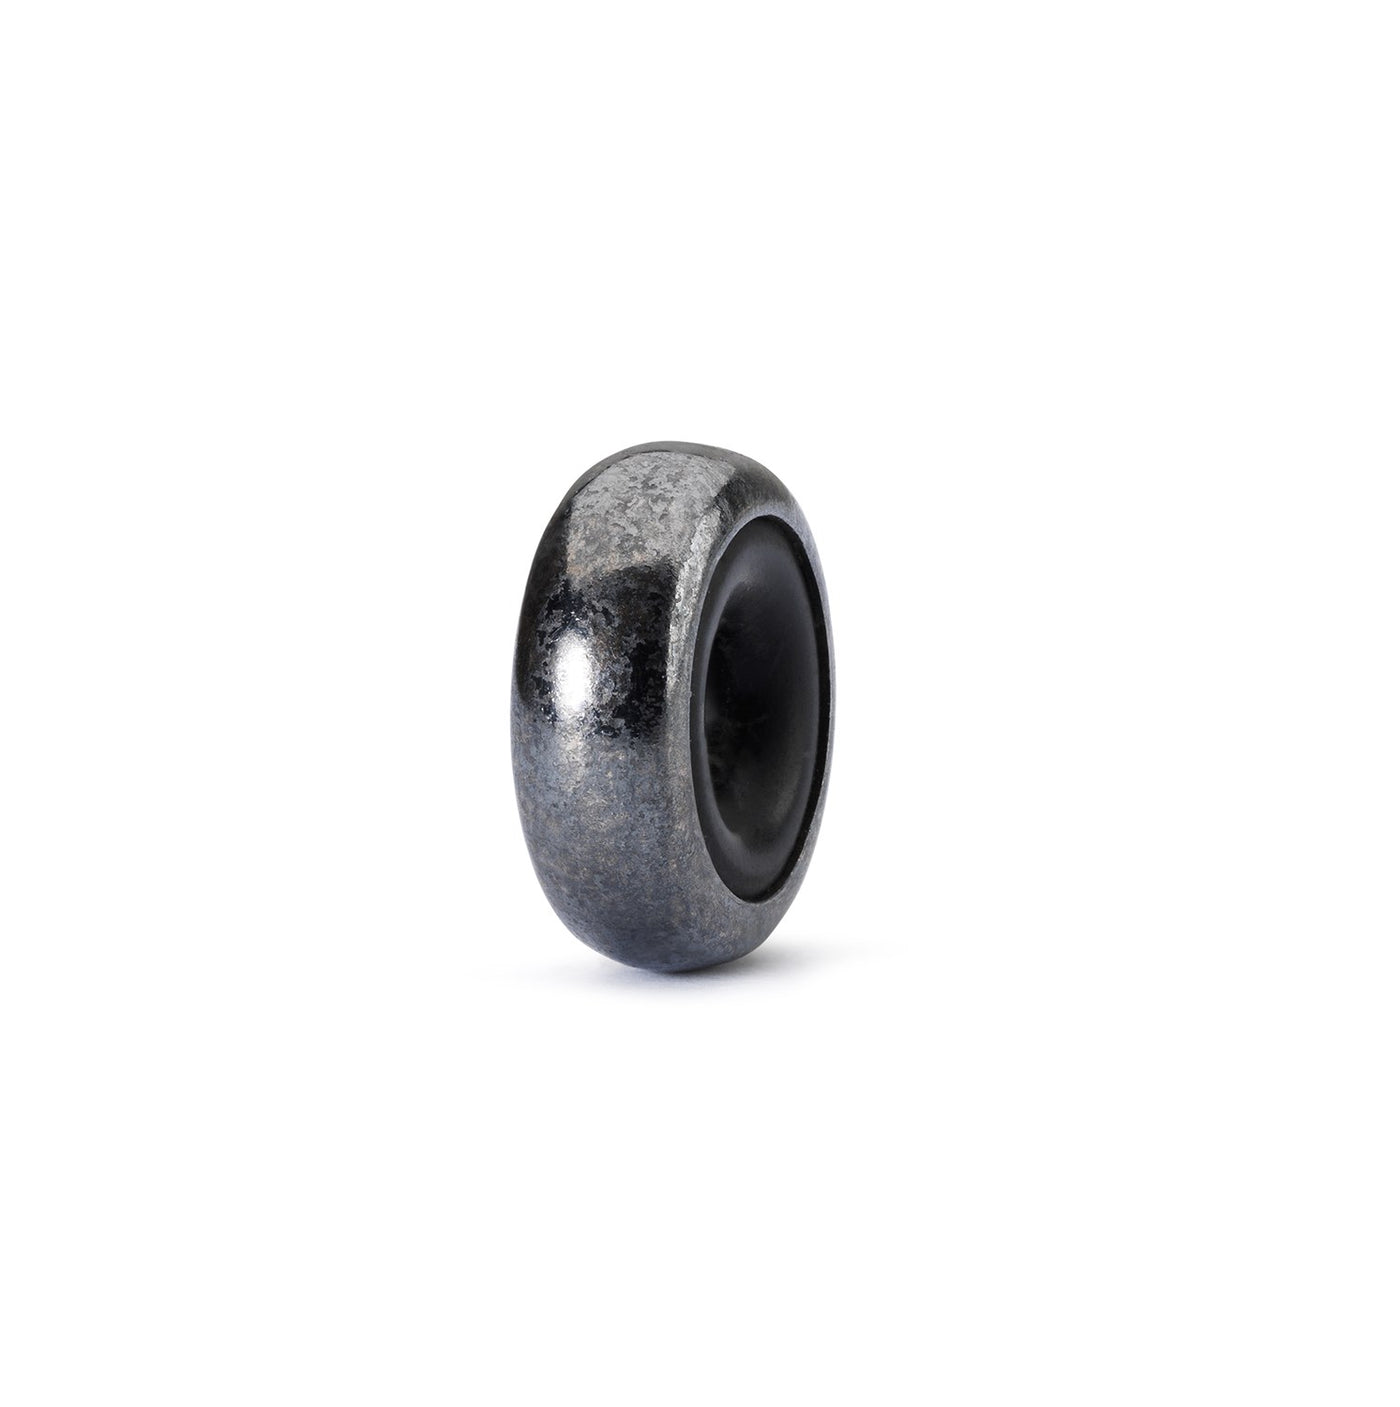 A sleek and stylish spacer bead with a dark, oxidized silver finish that contains rubber in the core to prevent beads from rolling of your bracelet.